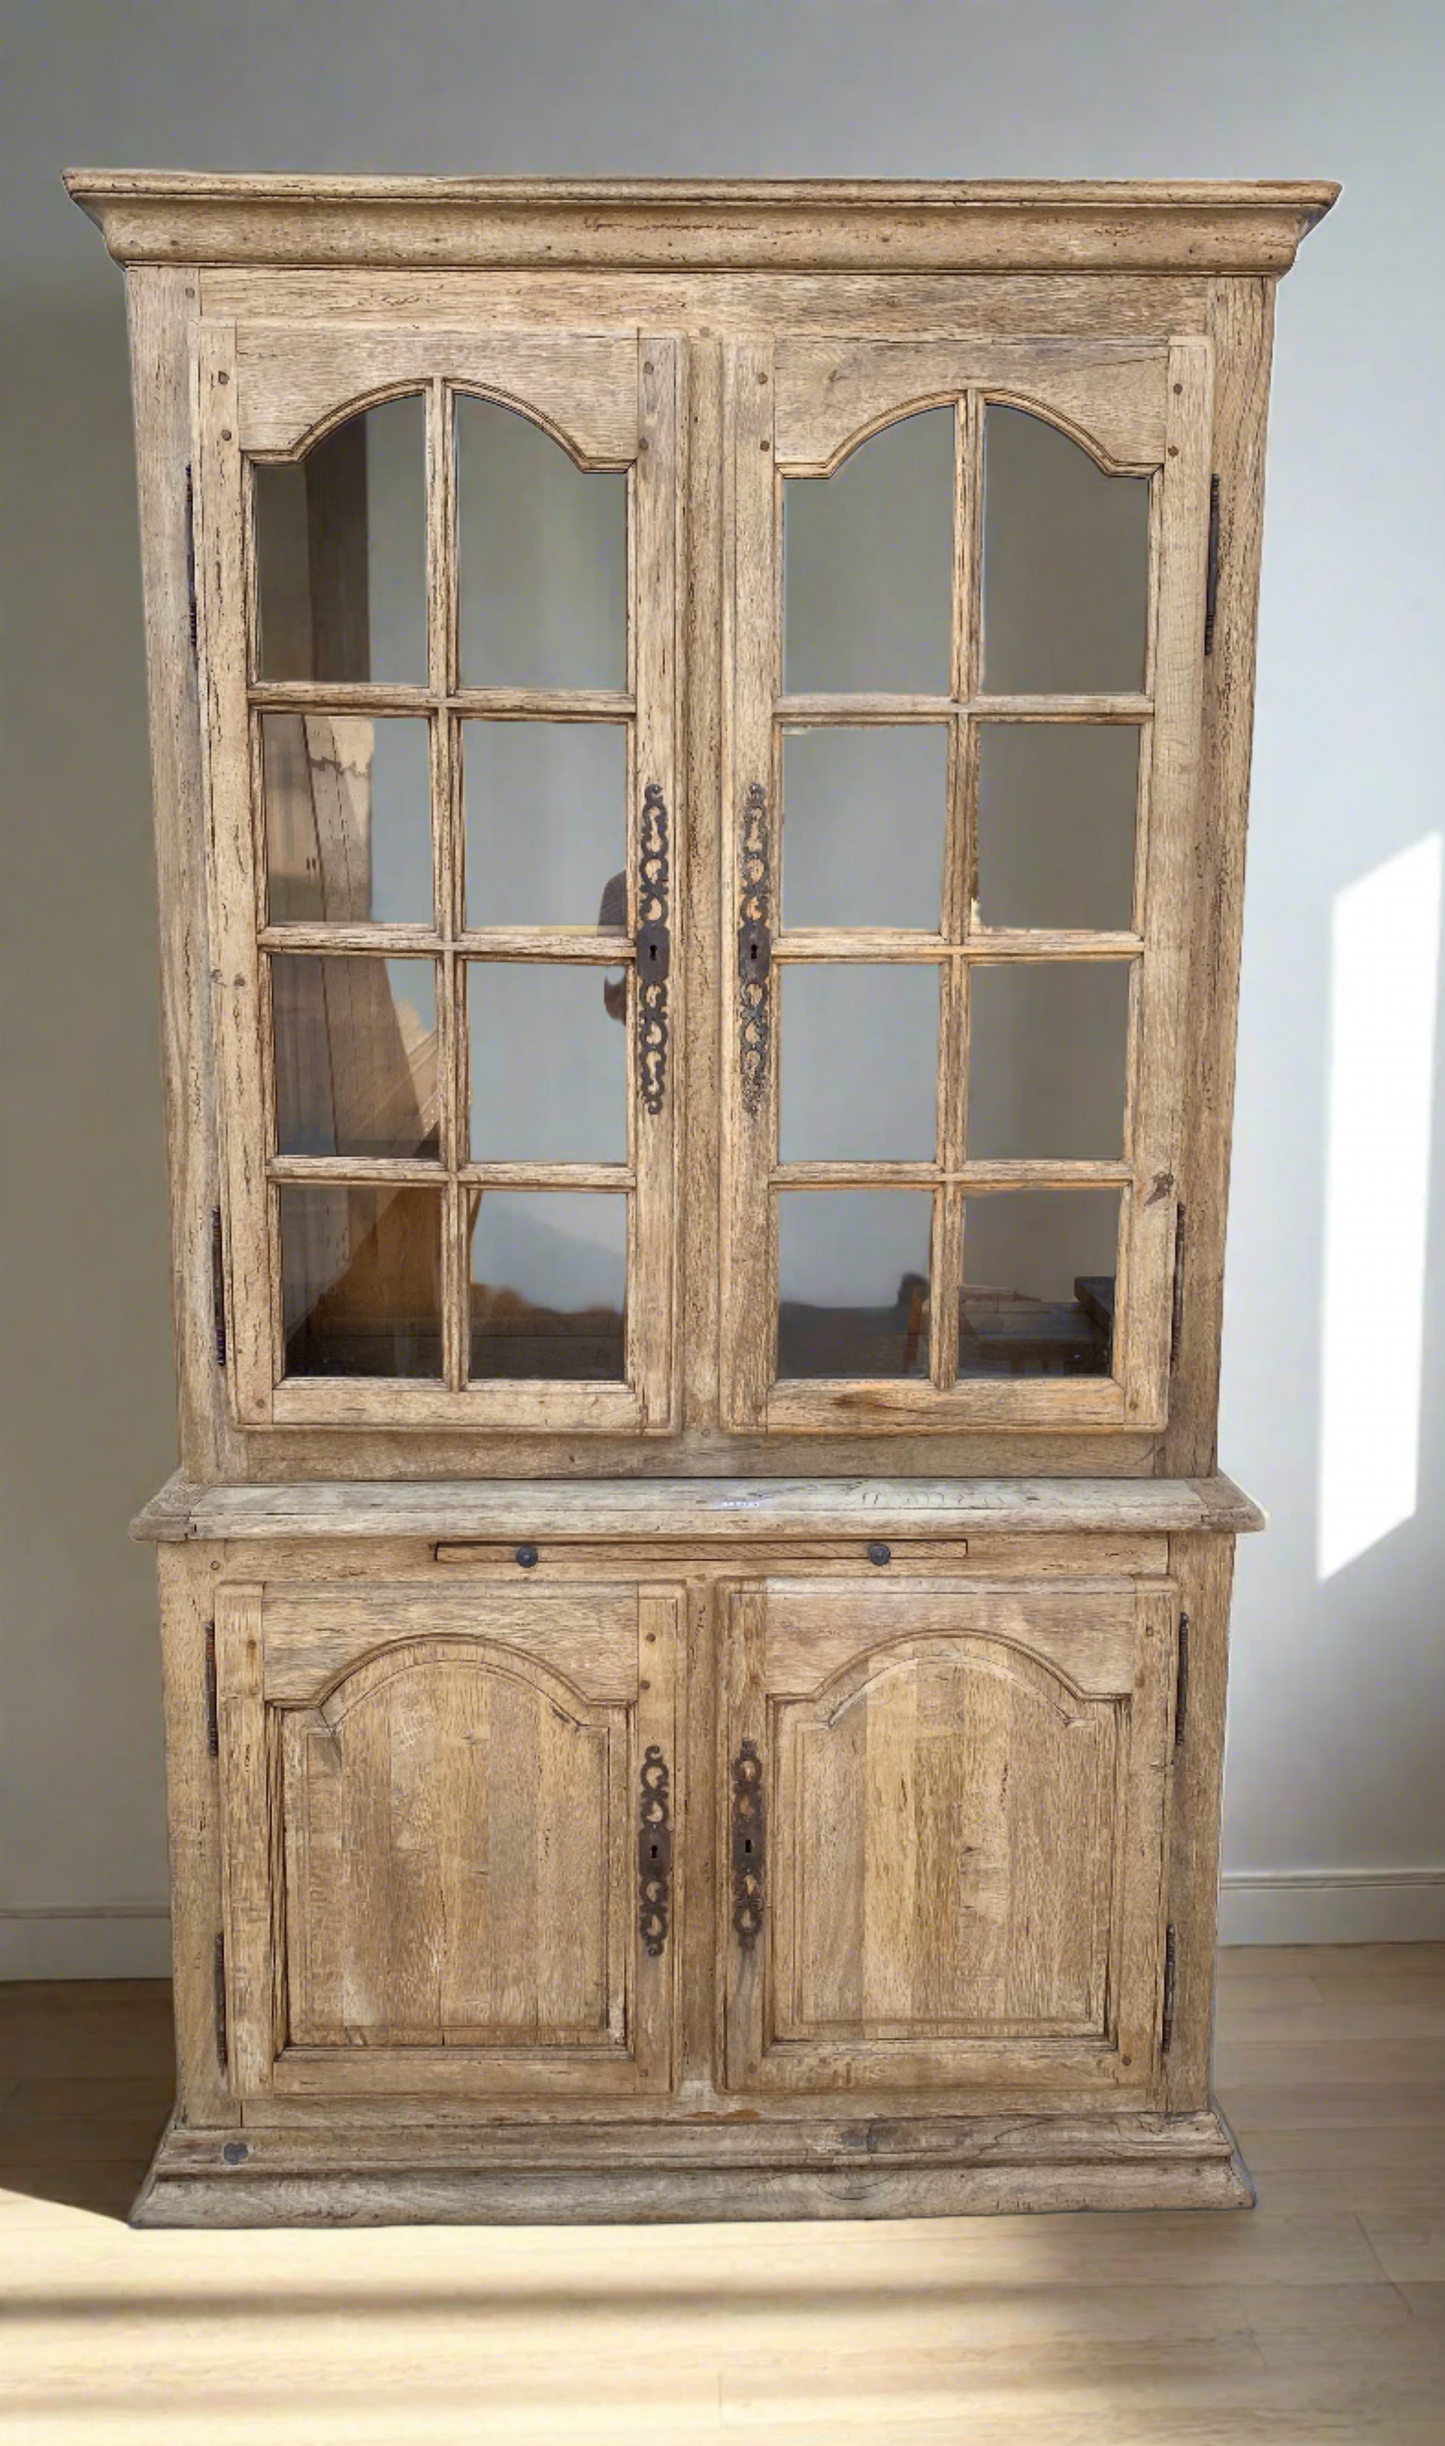 Bleached Antique Display Cabinet